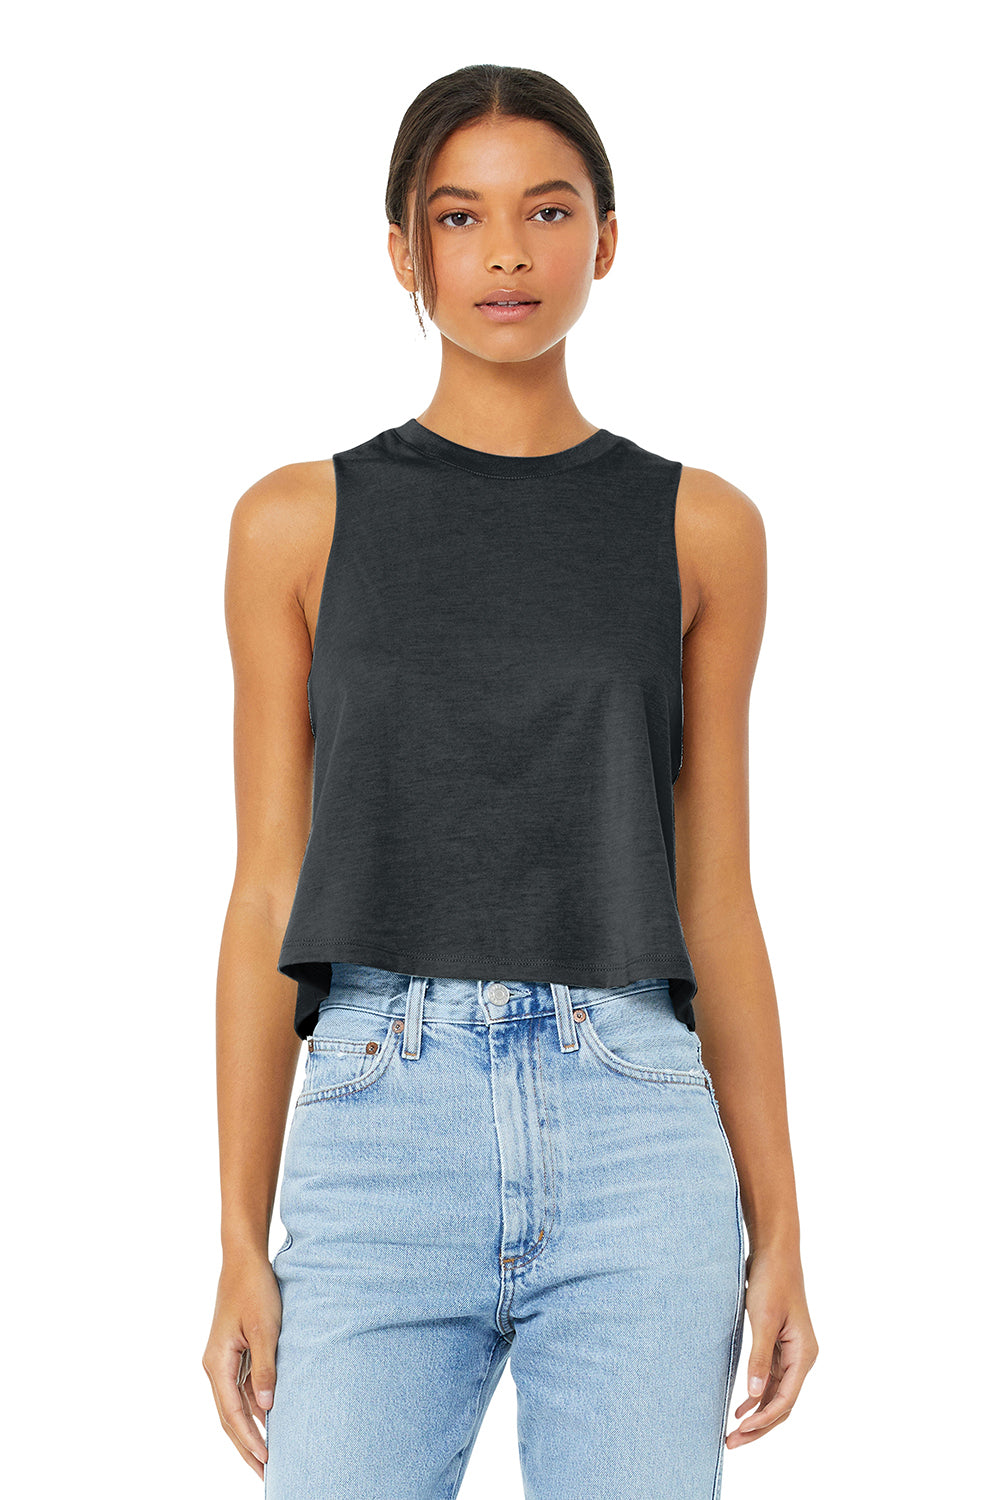 Bella + Canvas BC6682/6682 Womens Cropped Tank Top Heather Dark Grey Model Front